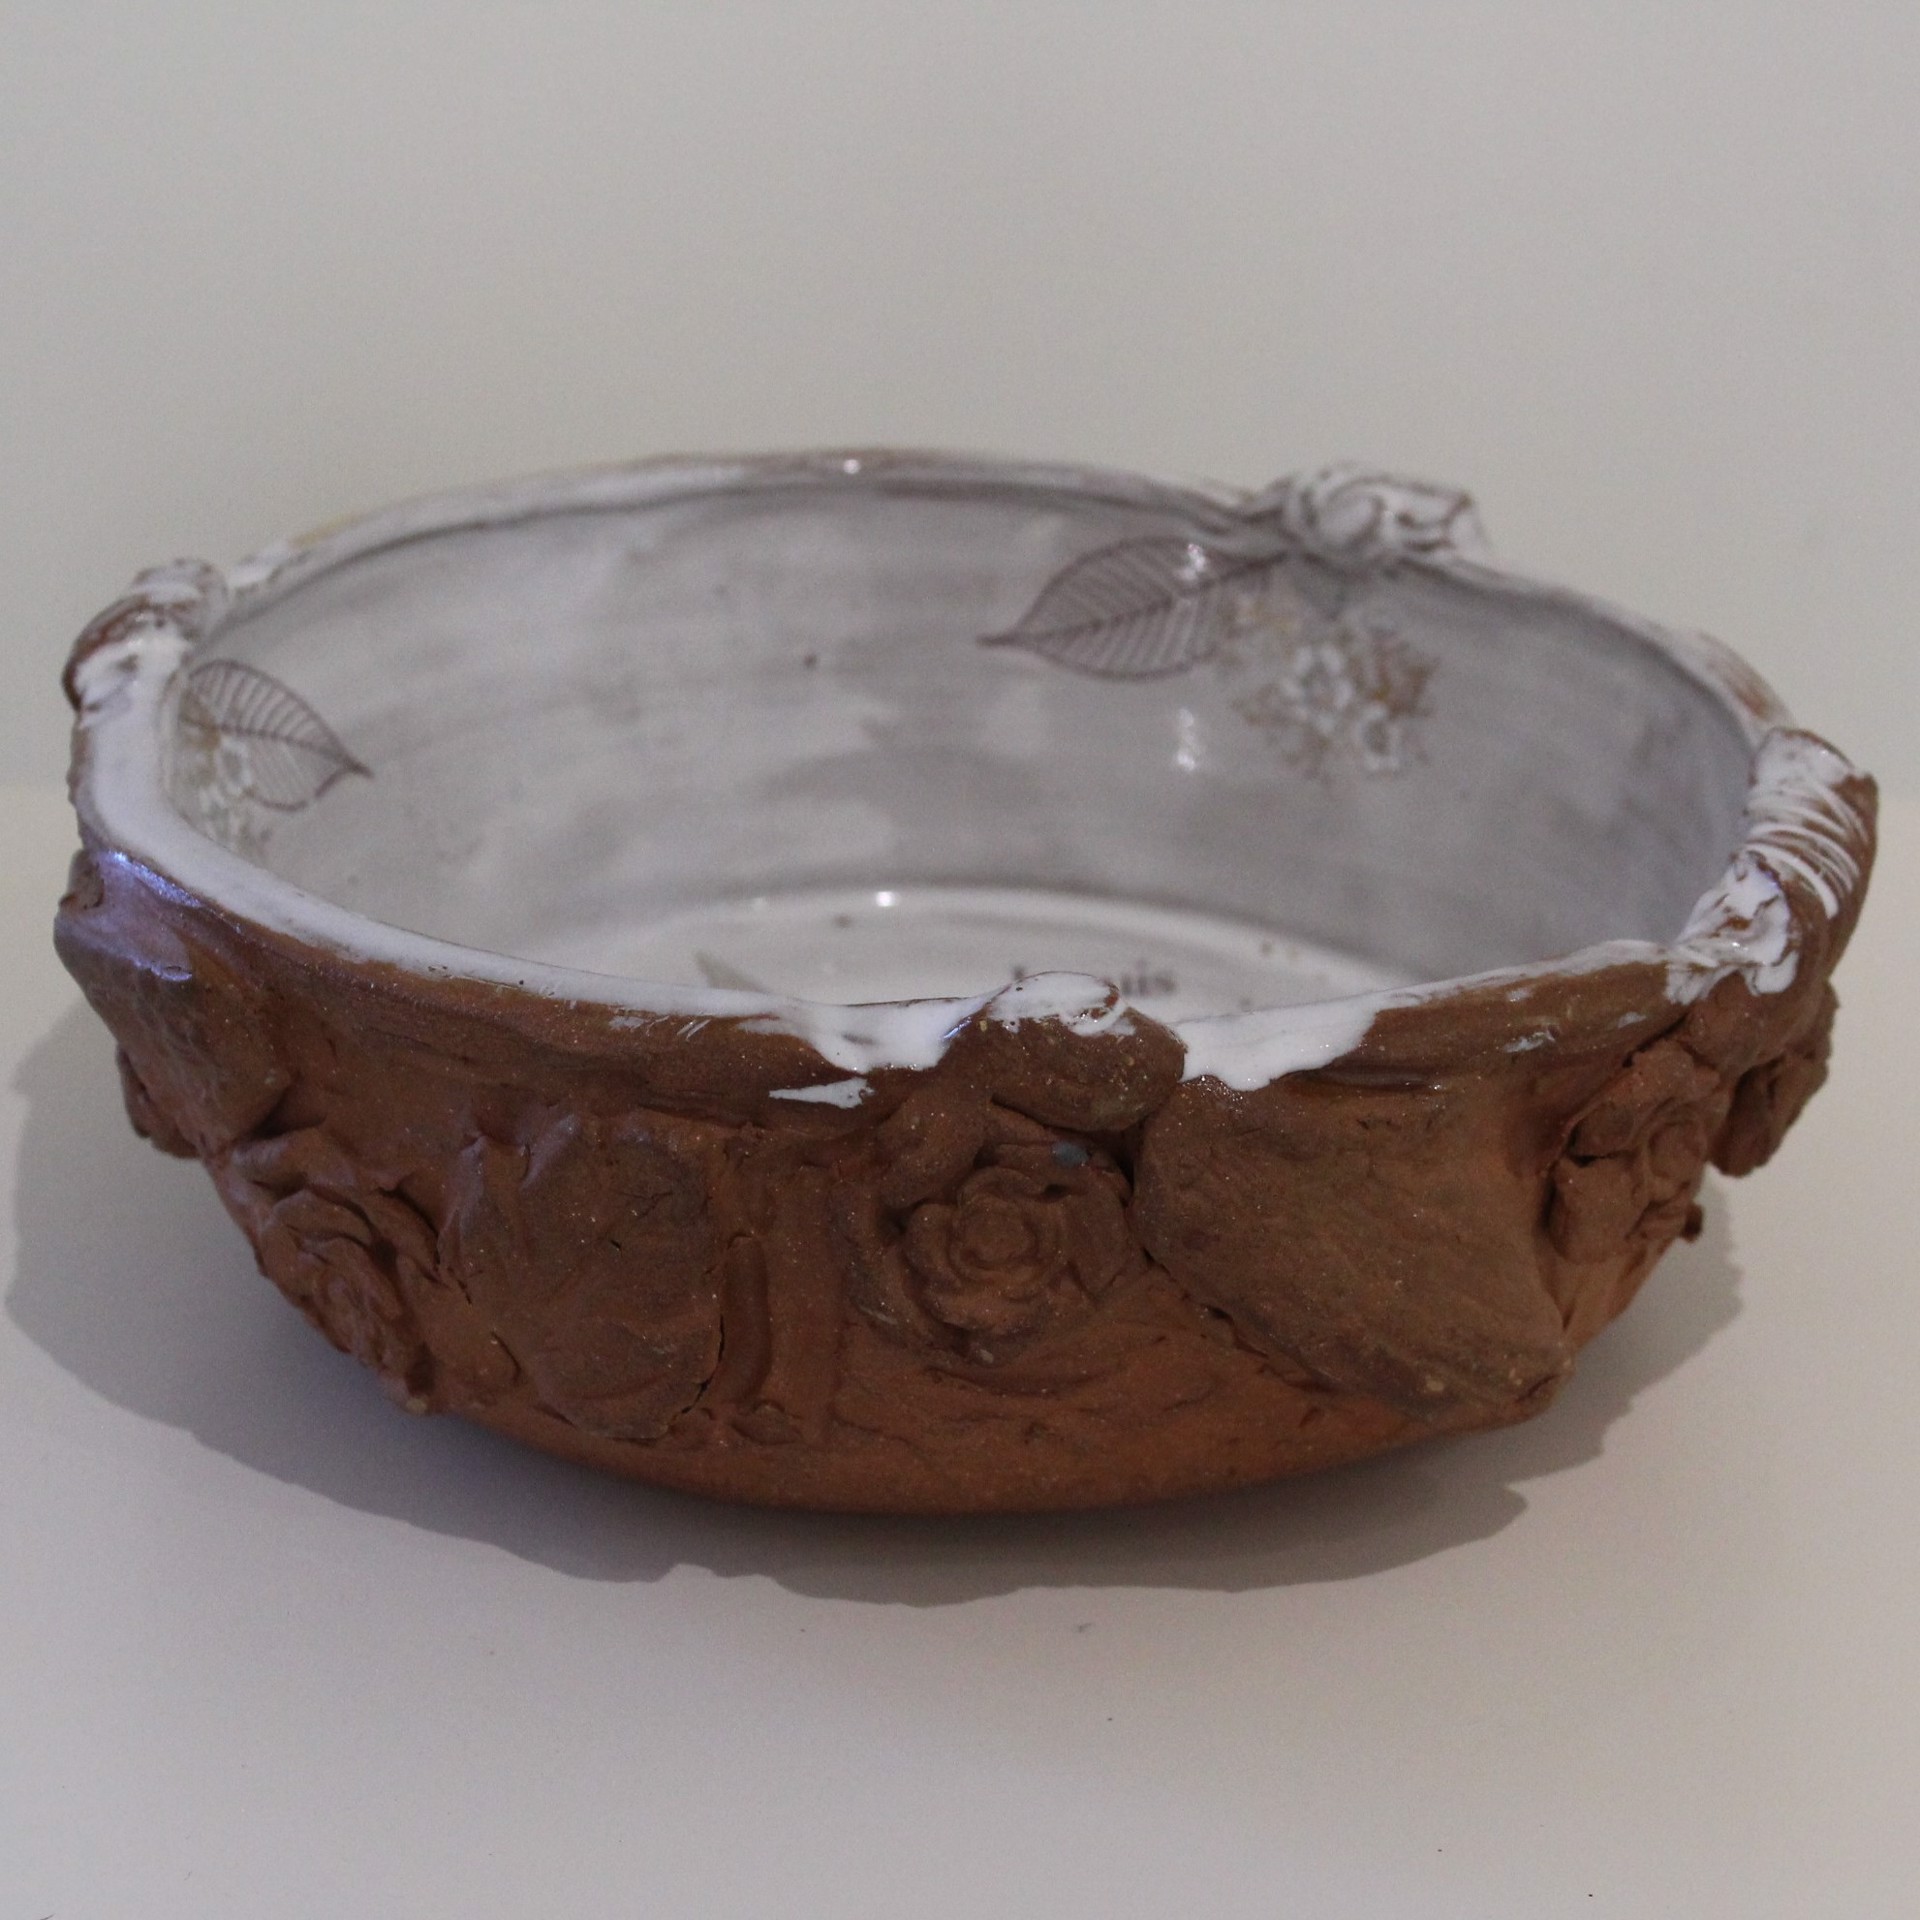 Large Carved Bowl by Therese Knowles